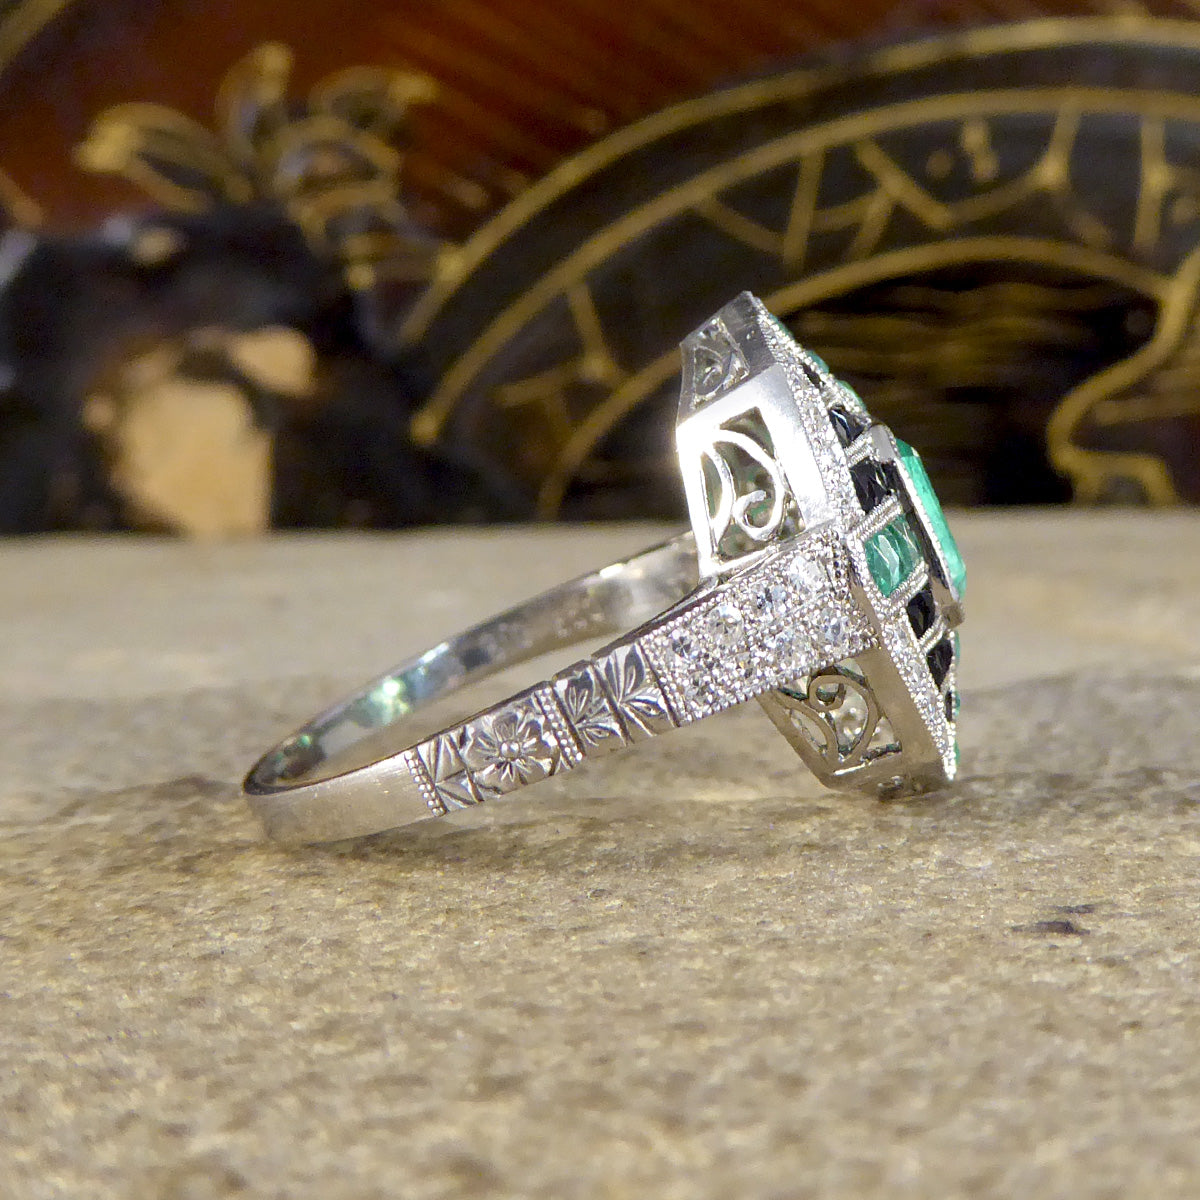 Art Deco Style Vintage Emerald Onyx and Diamond Geometric Cluster Ring in Platinum